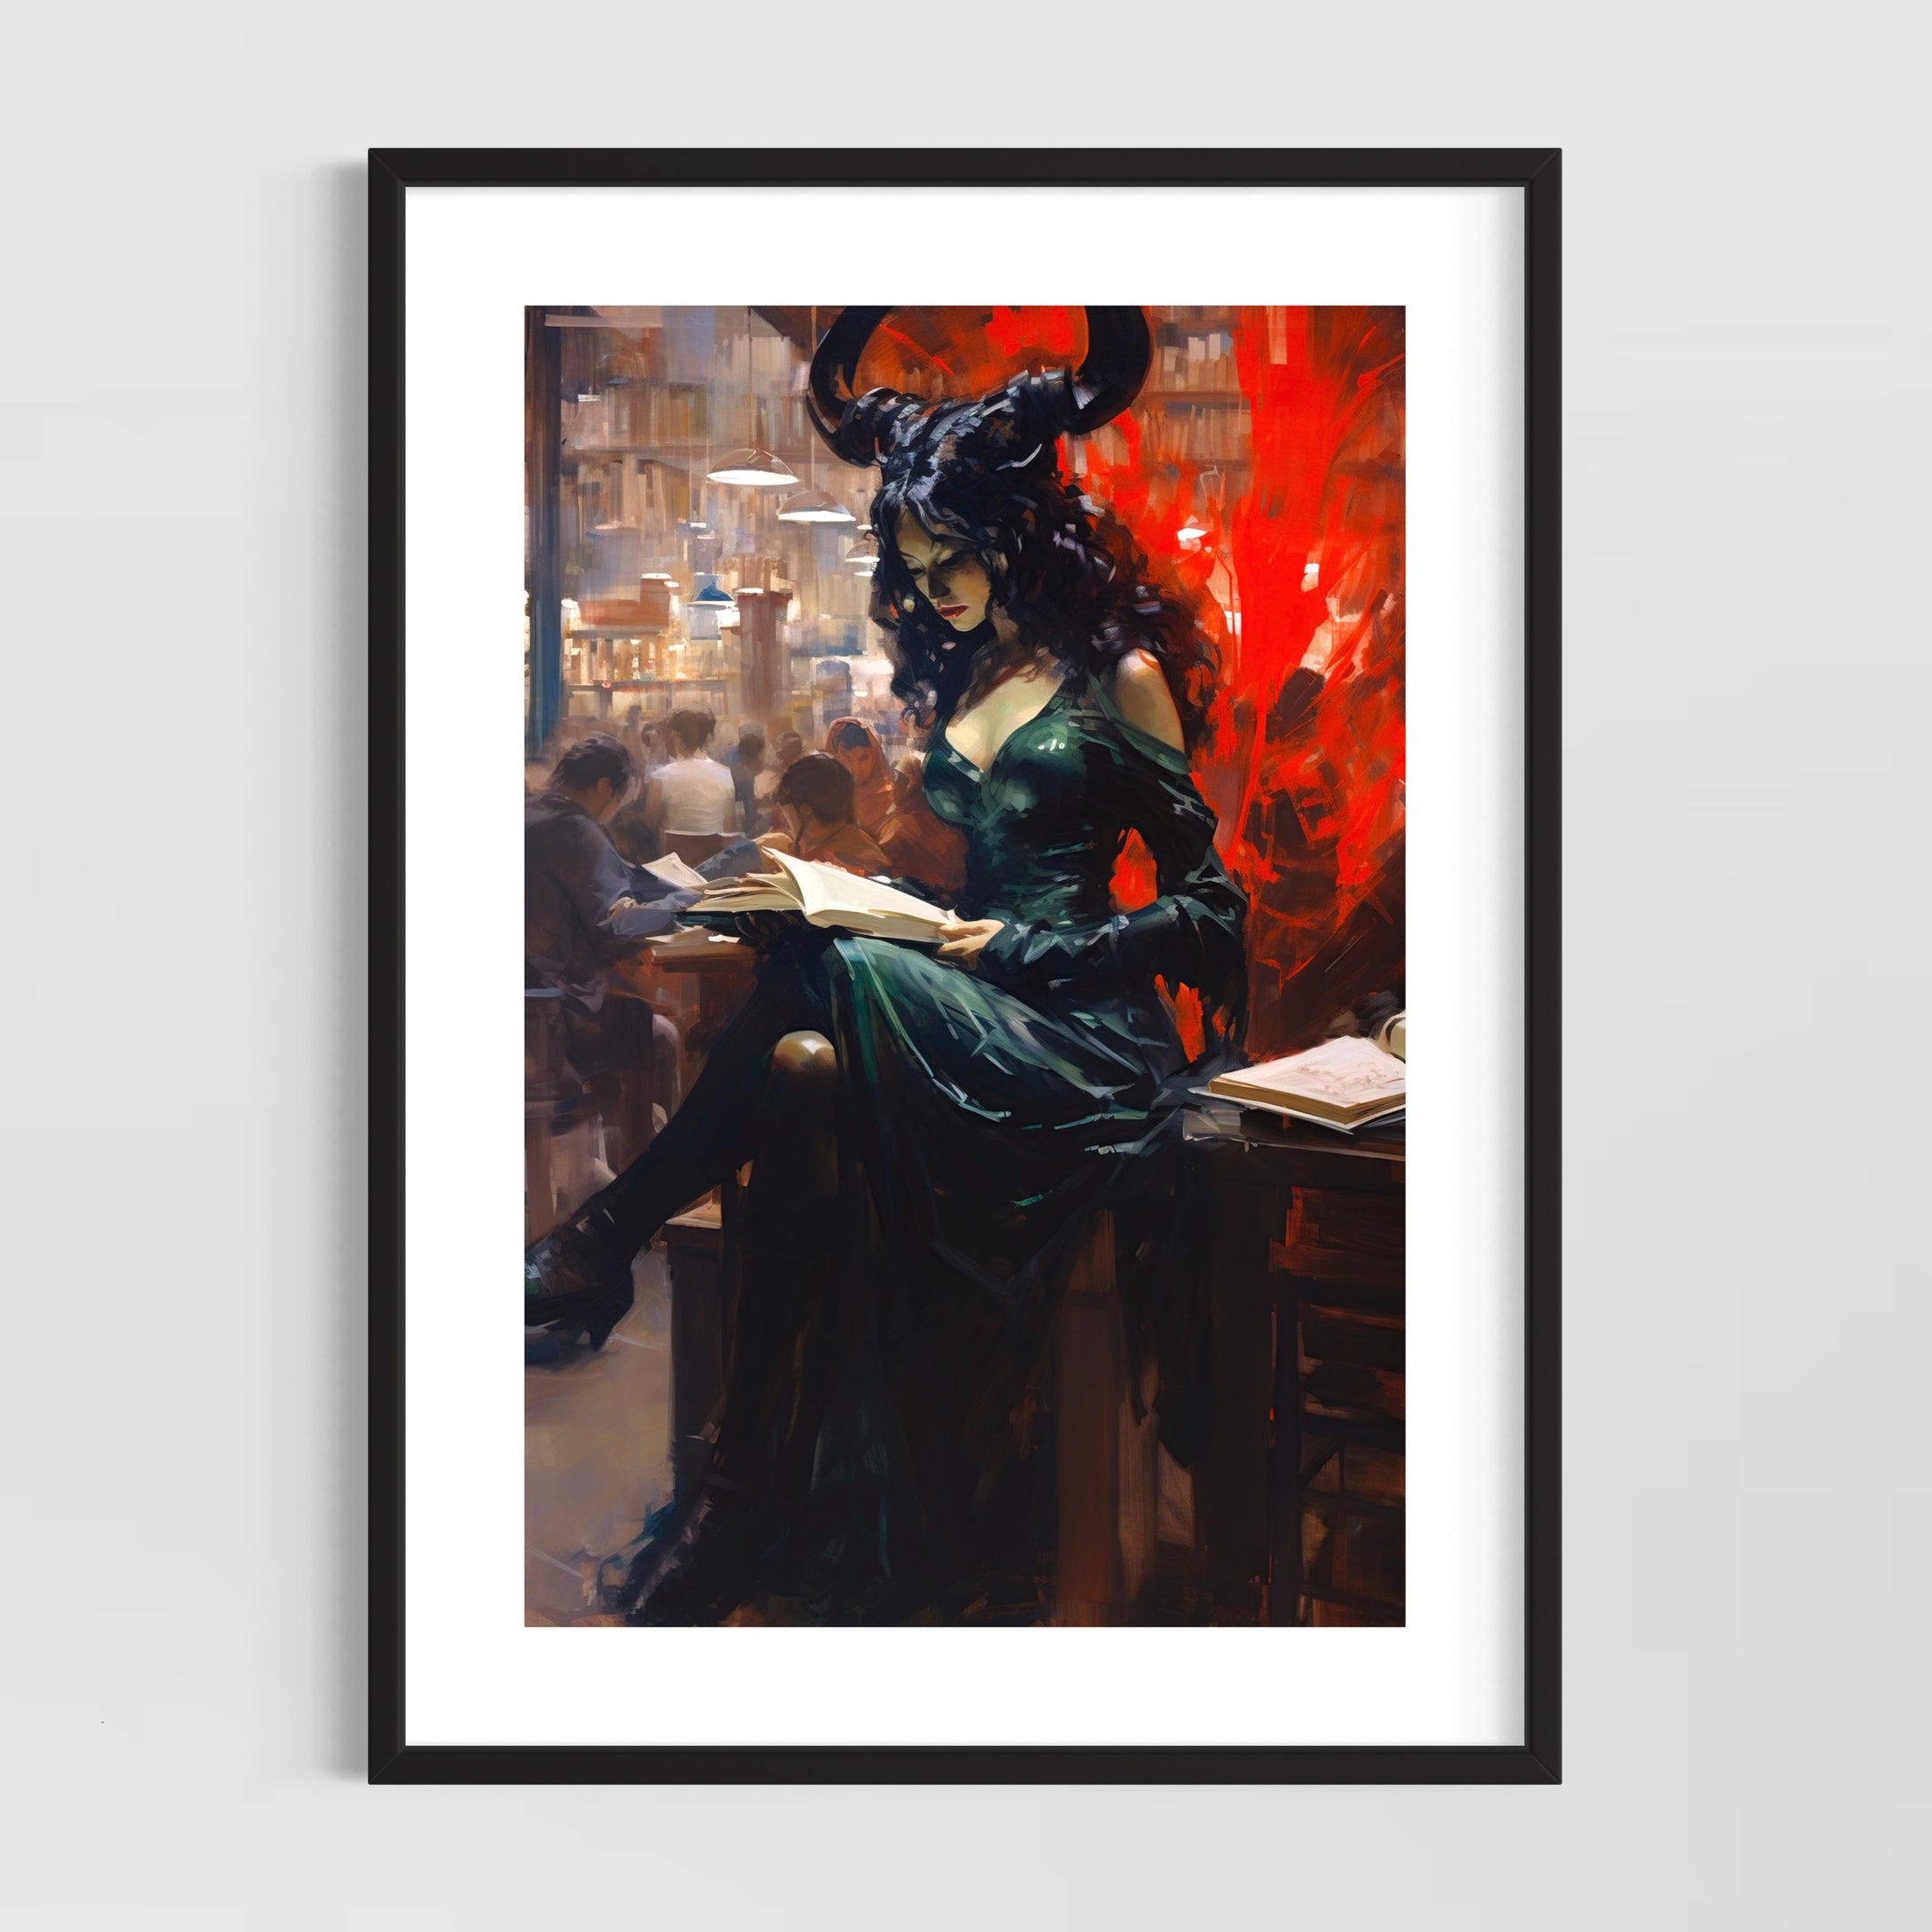 Witchy wall art - Moody painting - original fine art print